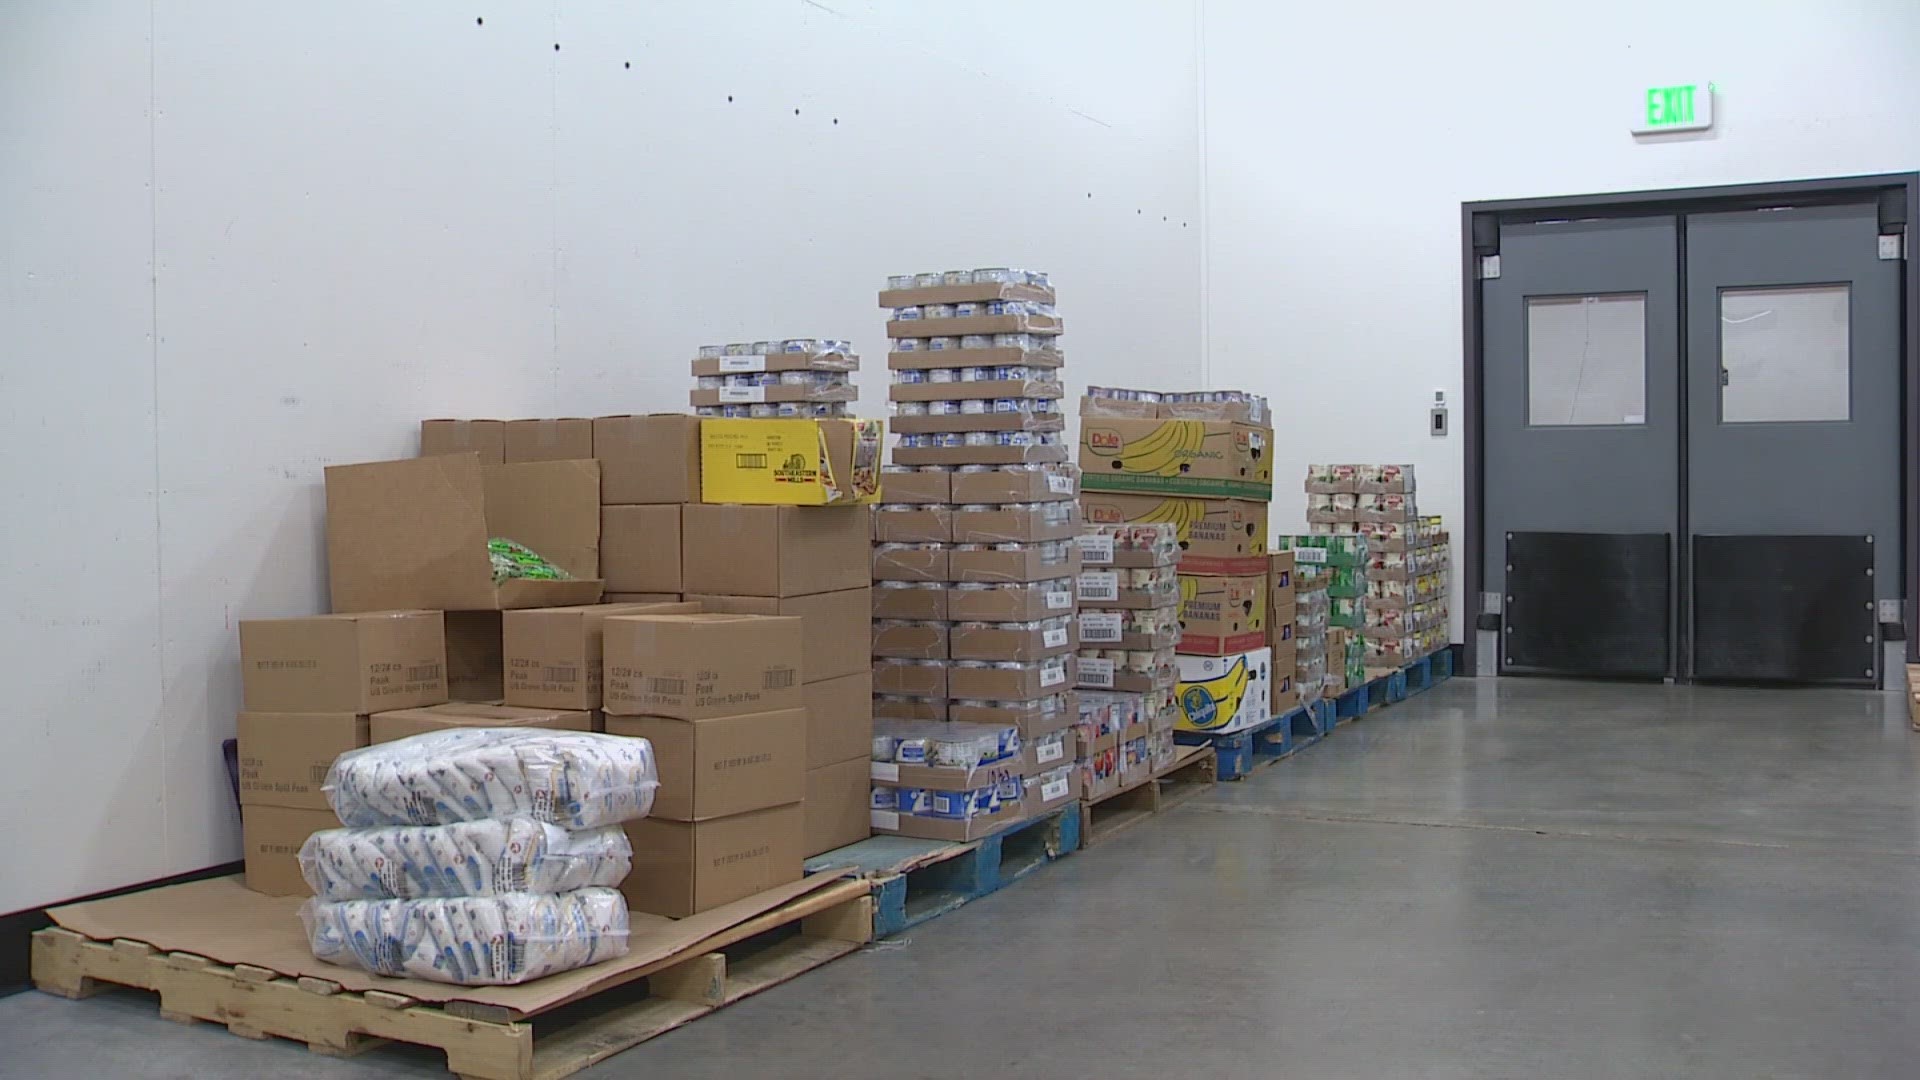 Eighteen percent of all households in the zip code visit the food bank consistently